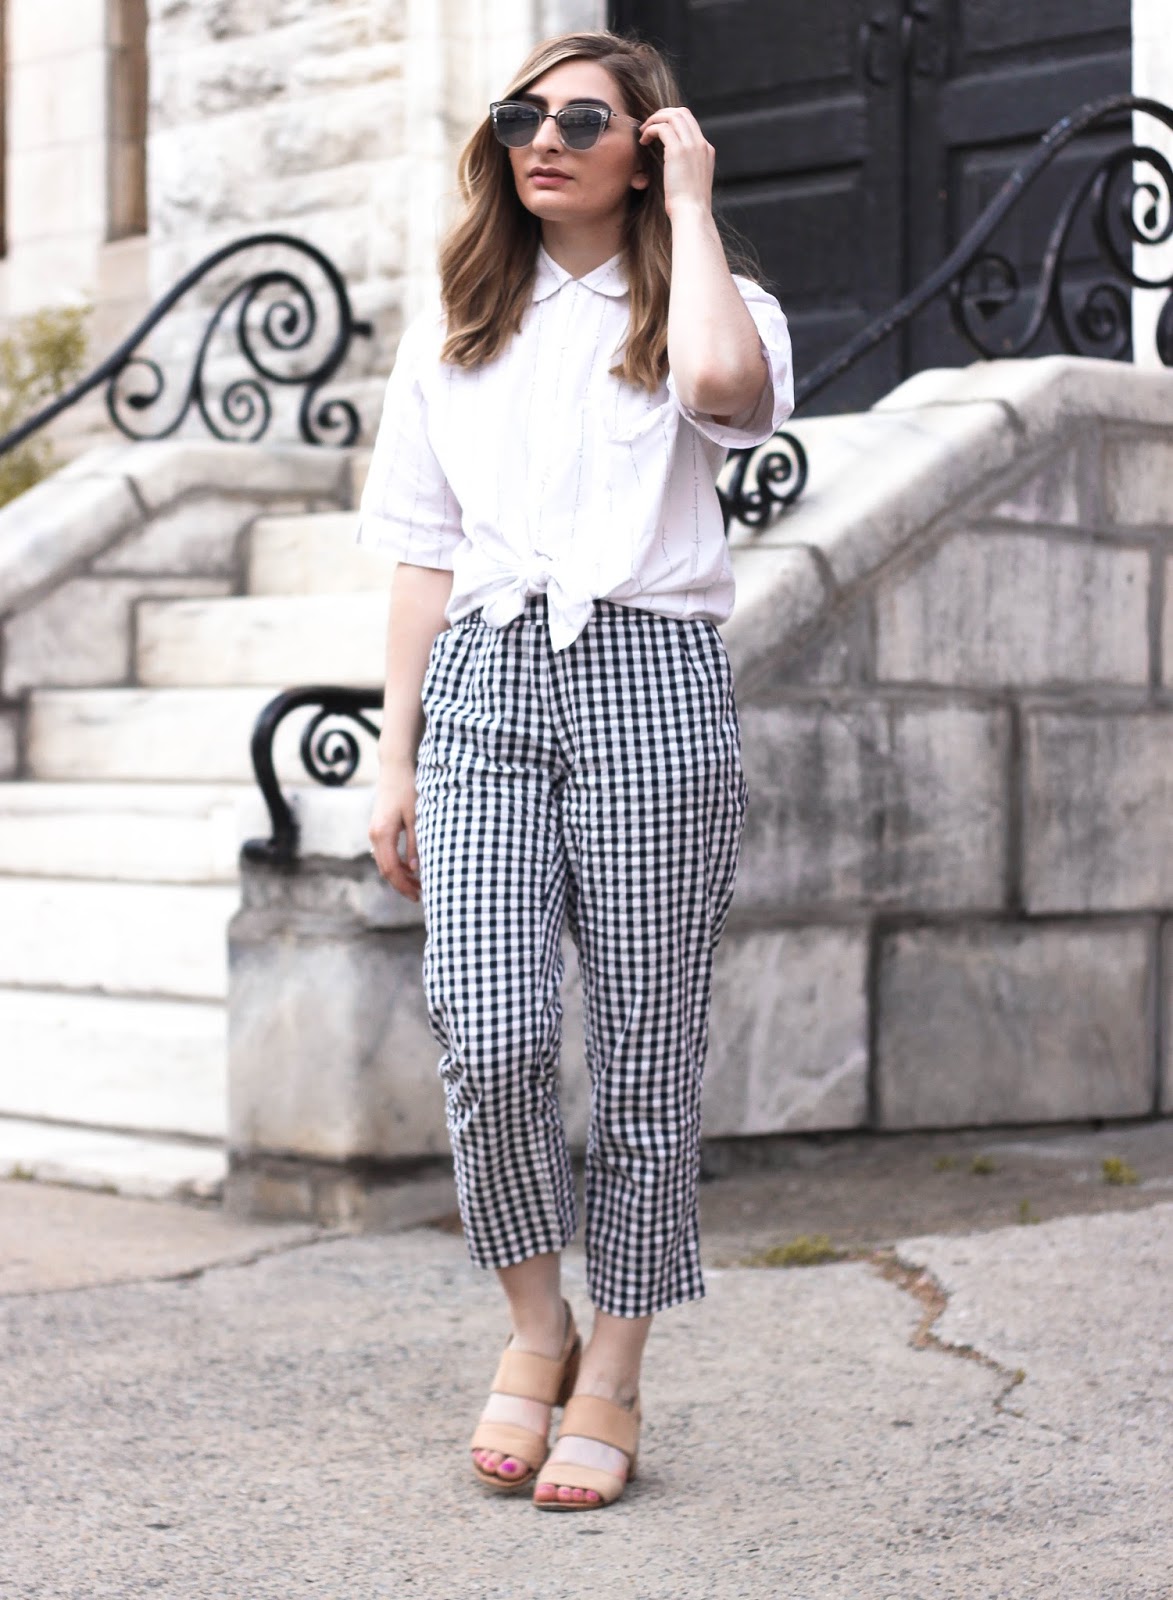 Gingham? I Don't Know Him! — life according to francesca